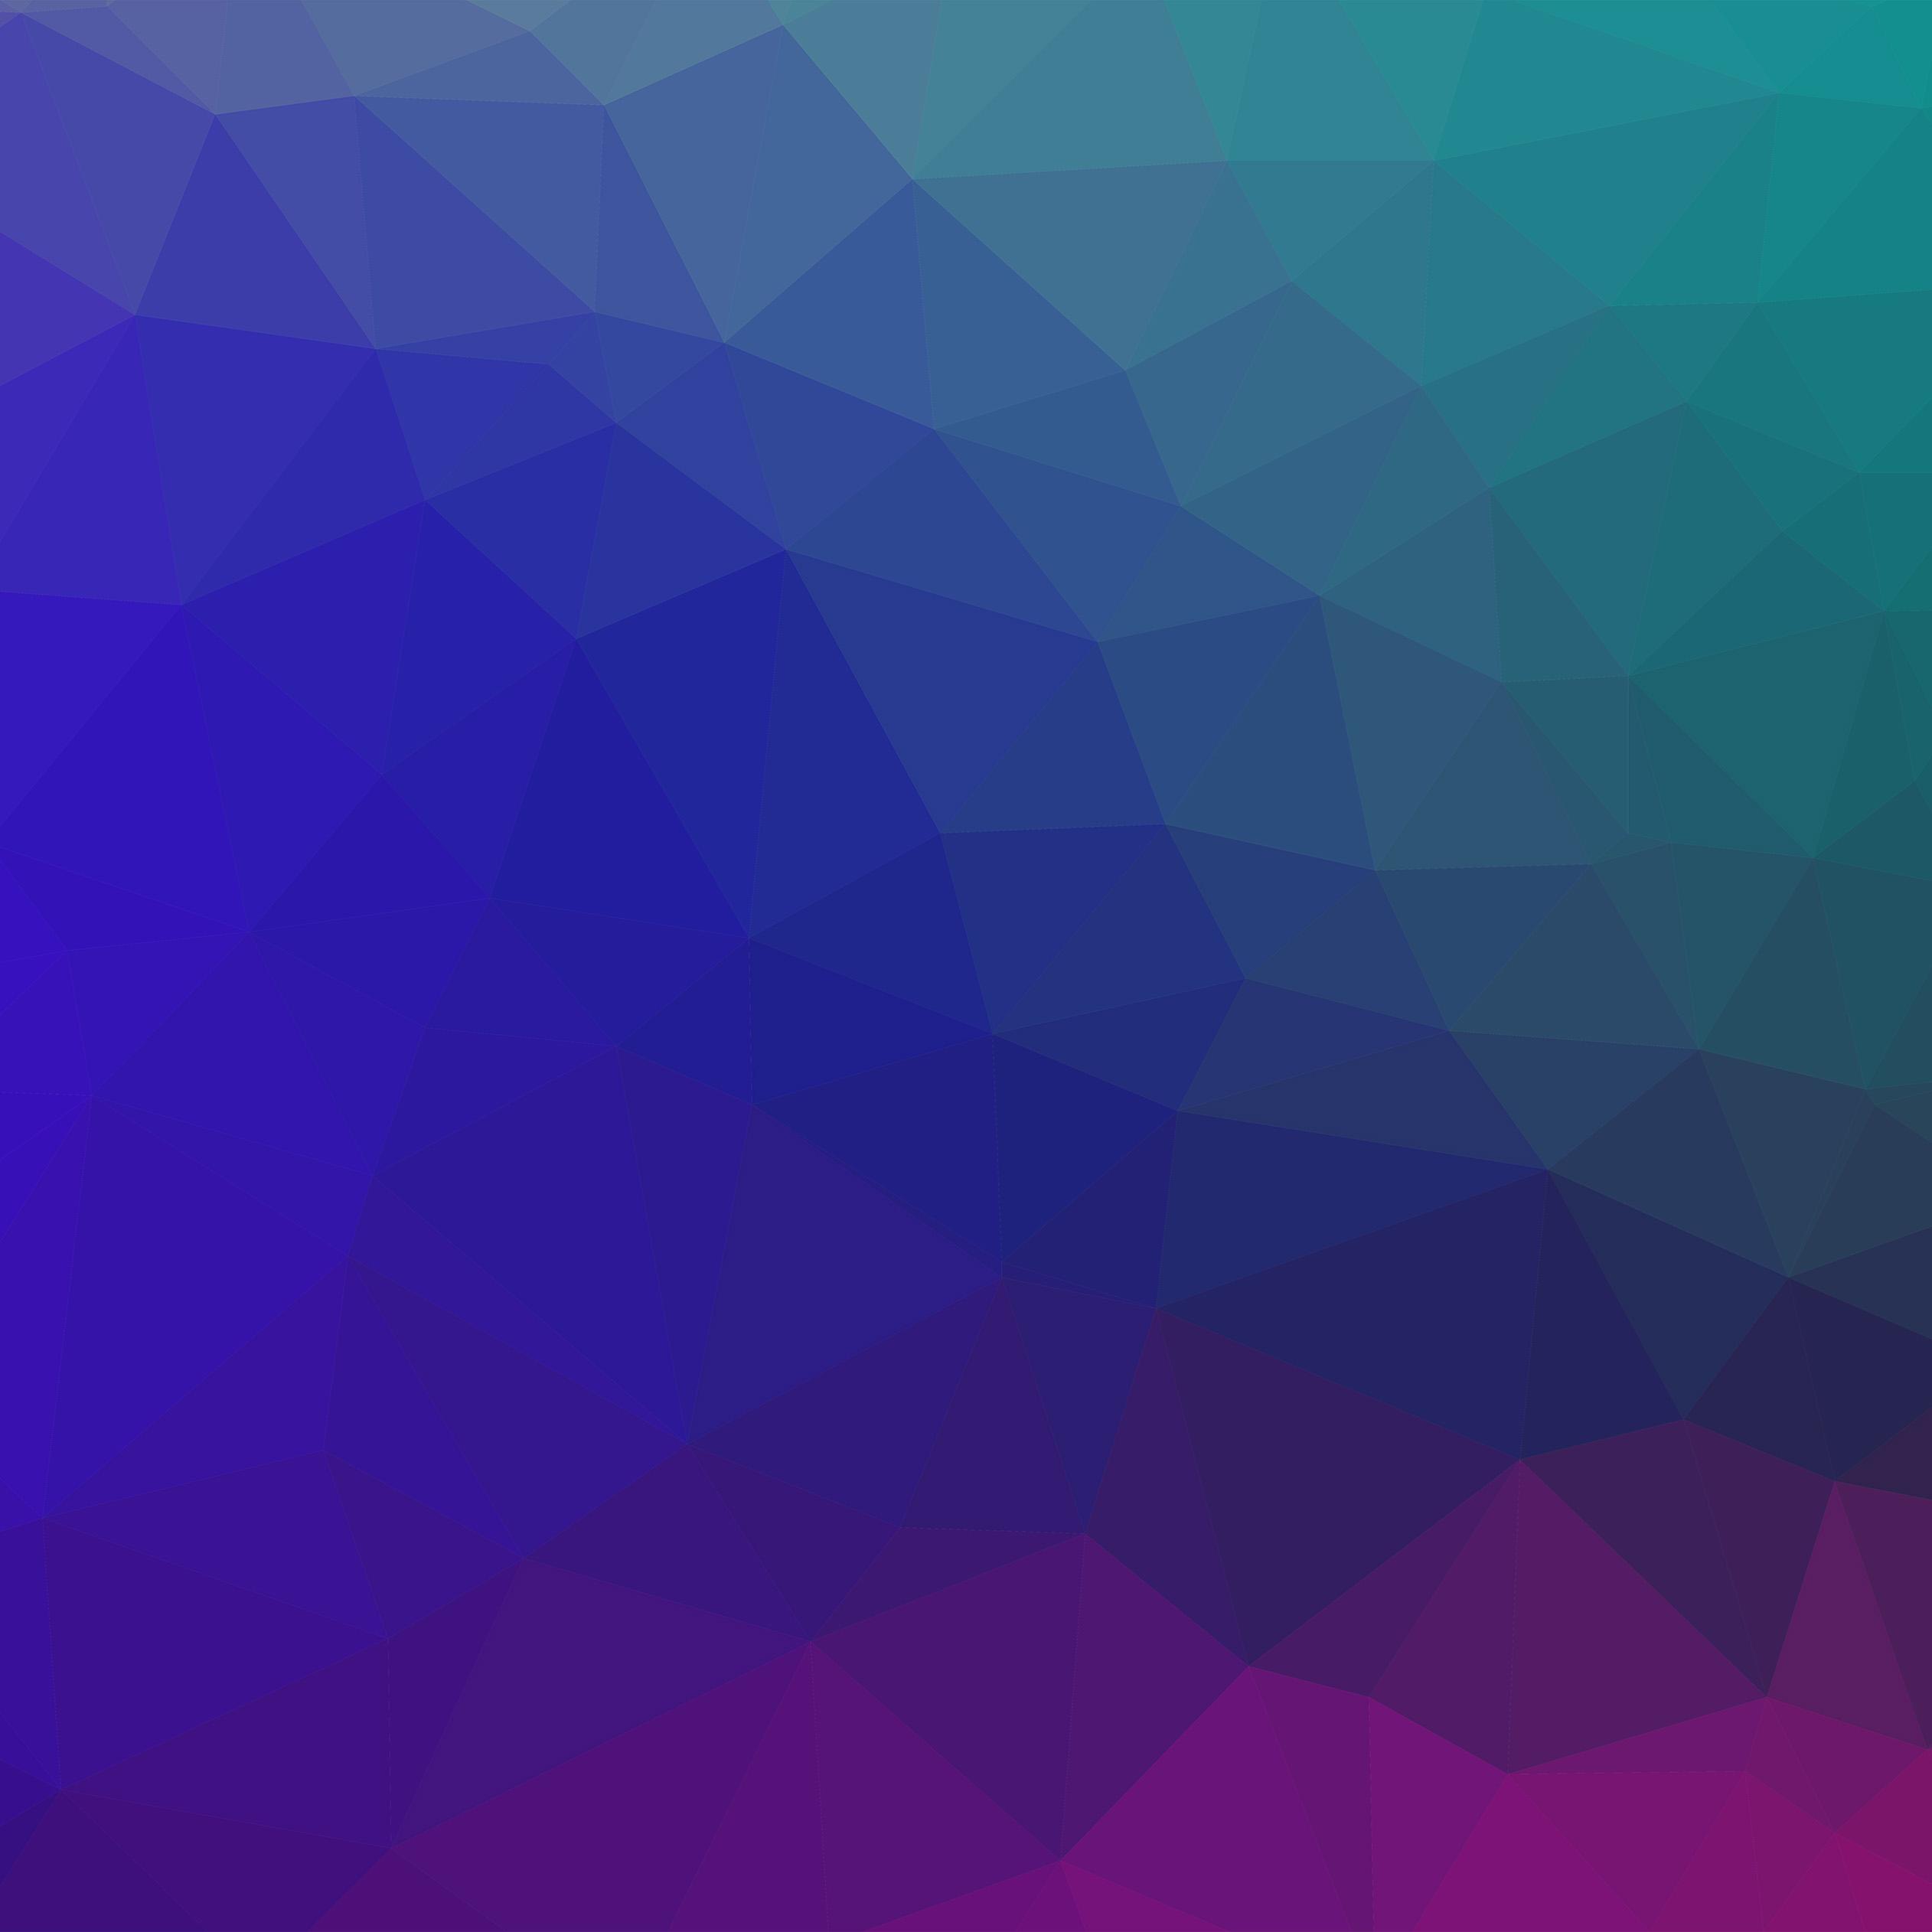 Wallpaper of the week: colorful shapes